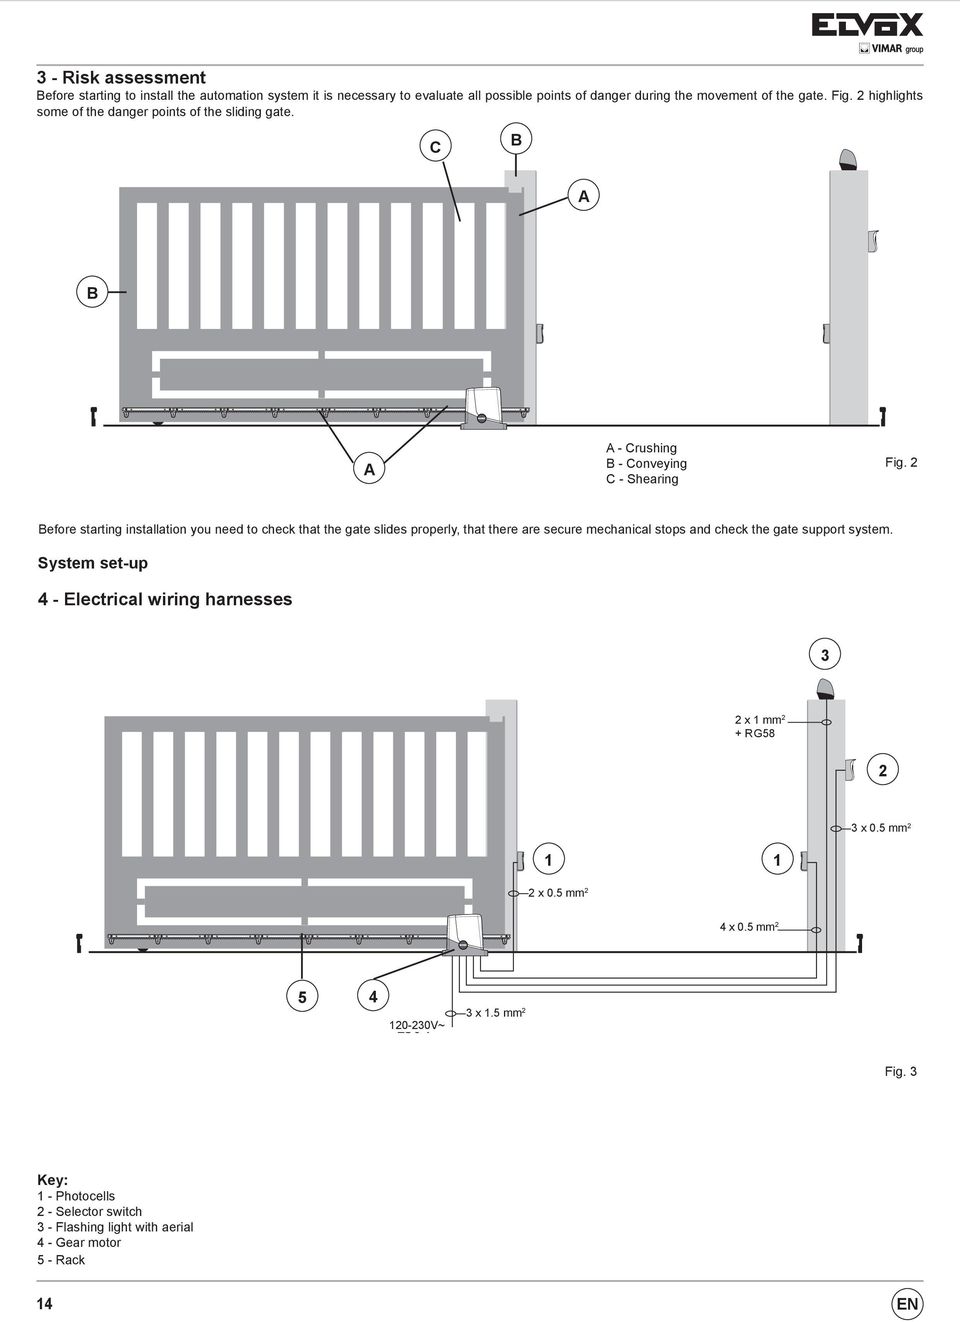 2 Before starting installation you need to check that the gate slides properly, that there are secure mechanical stops and check the gate support system.